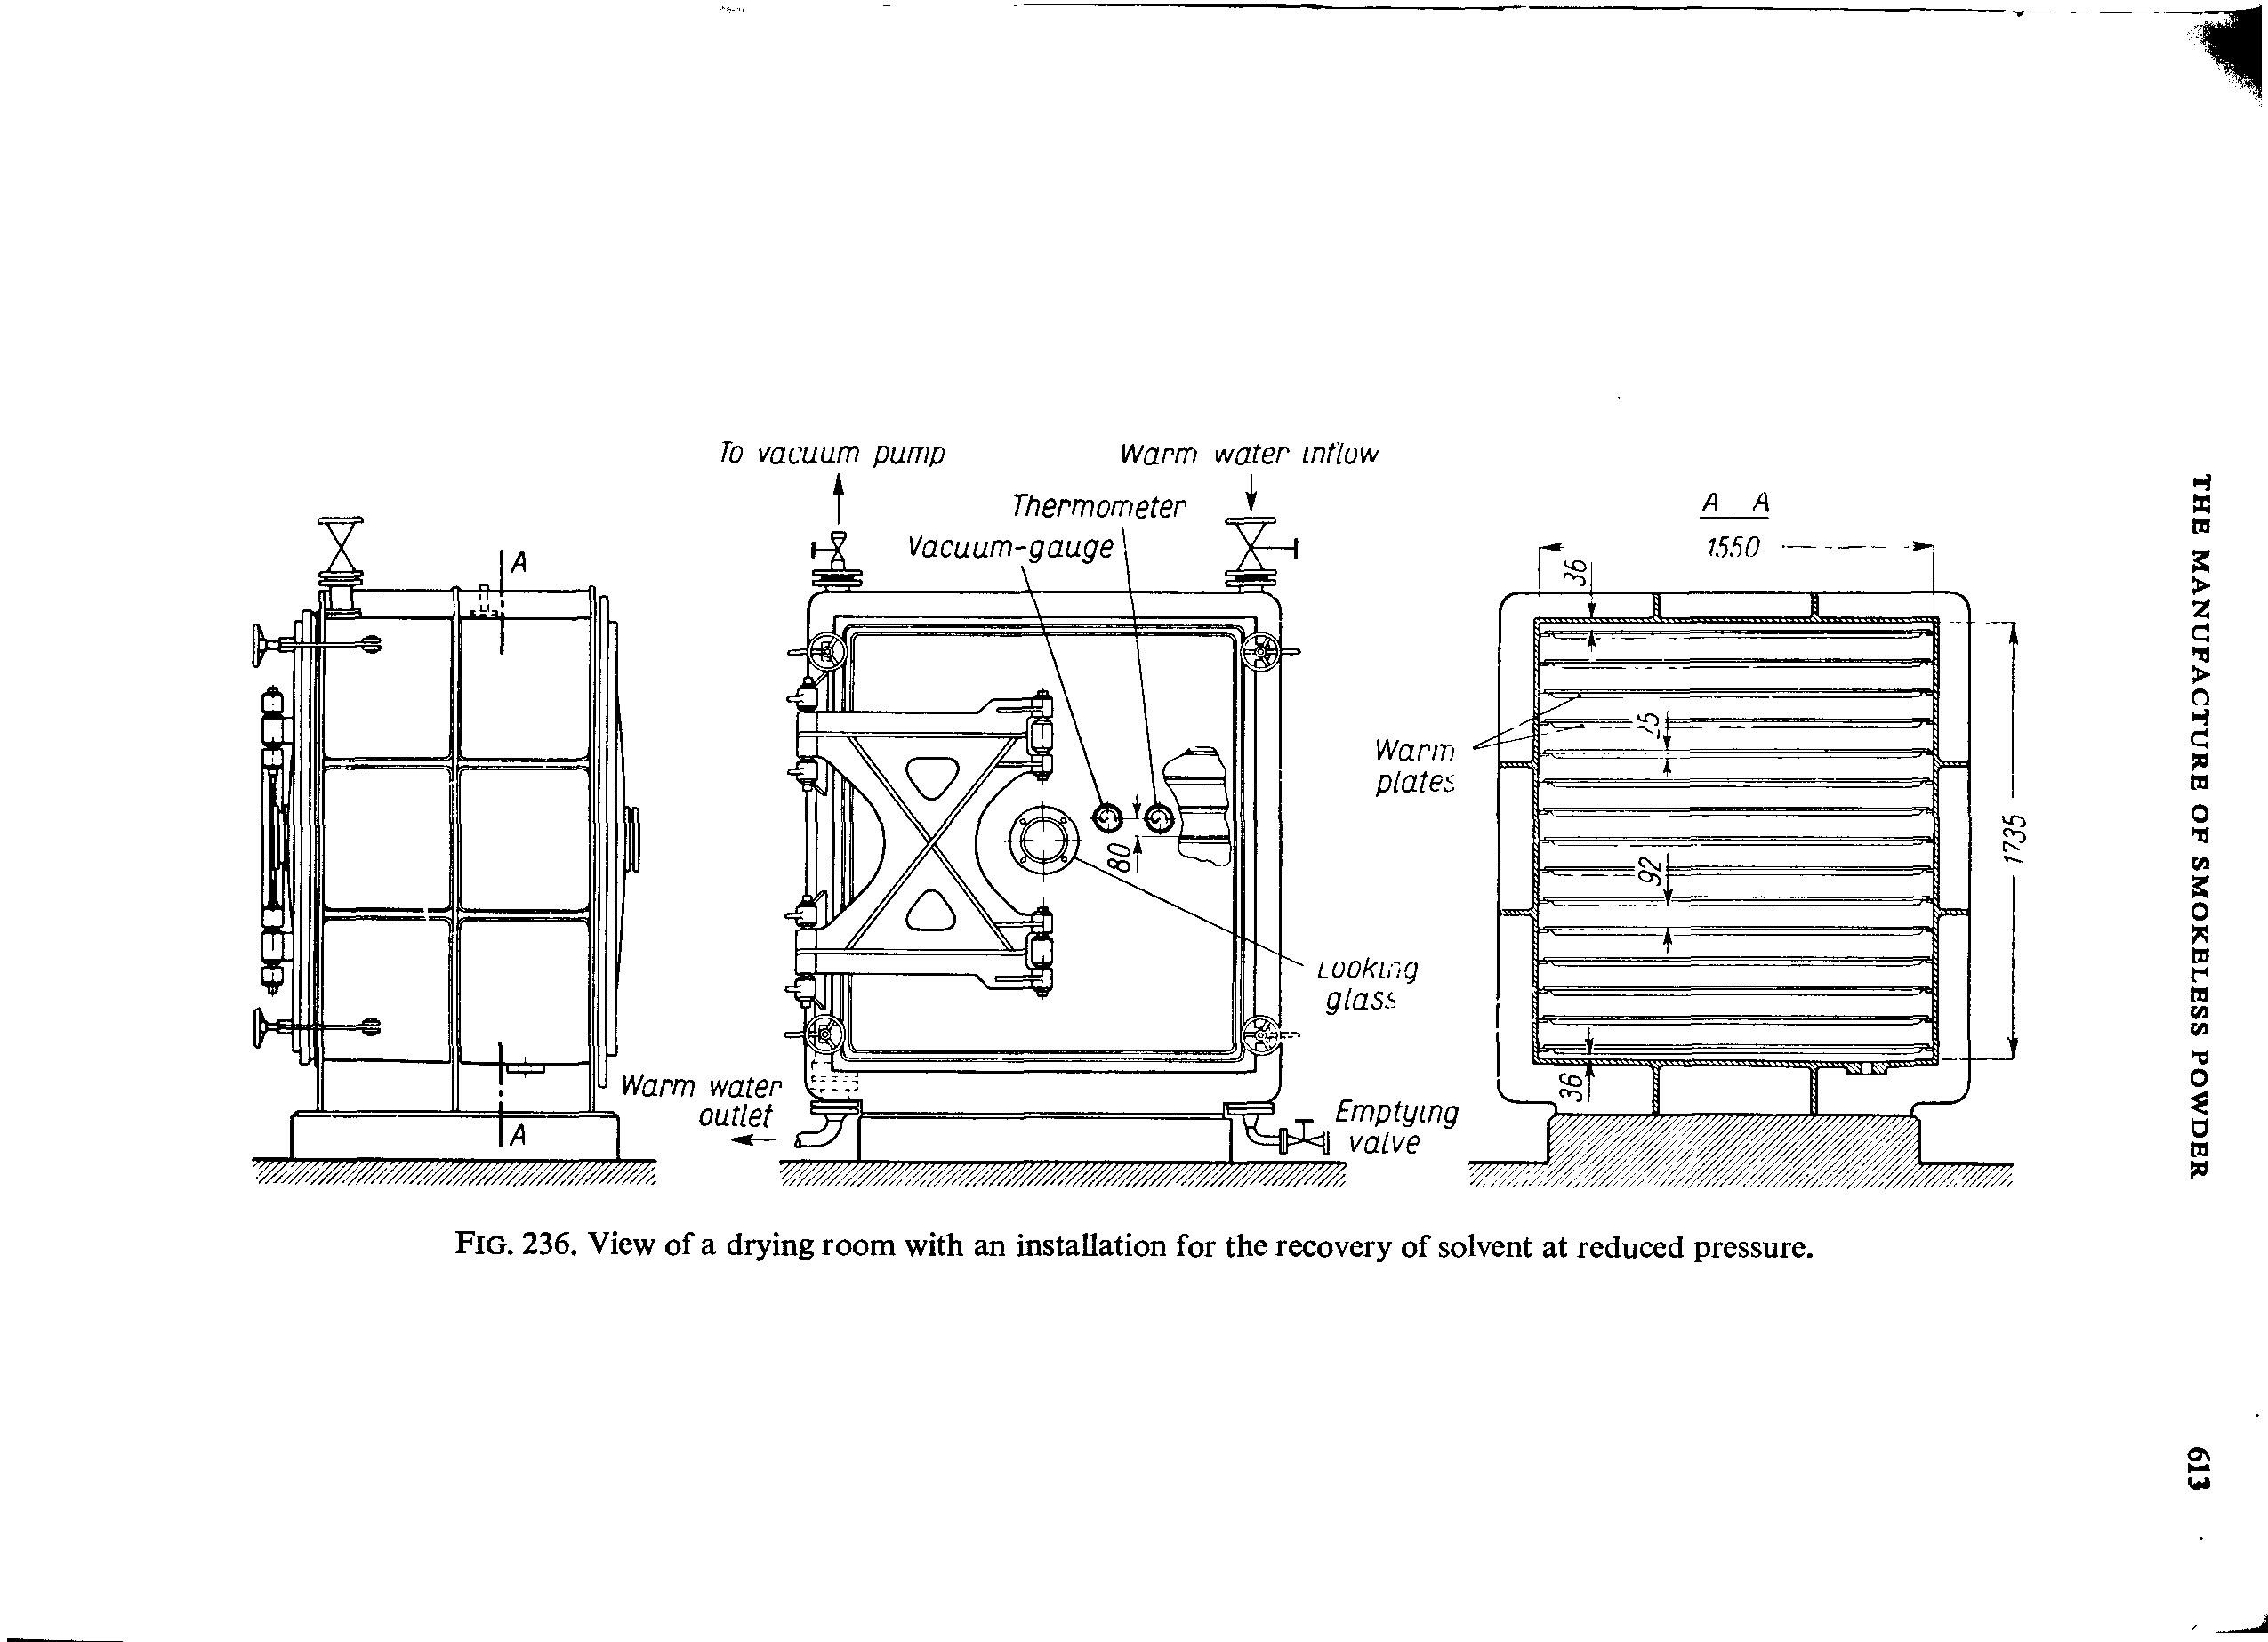 Fig. 236. View of a drying room with an installation for the recovery of solvent at reduced pressure.